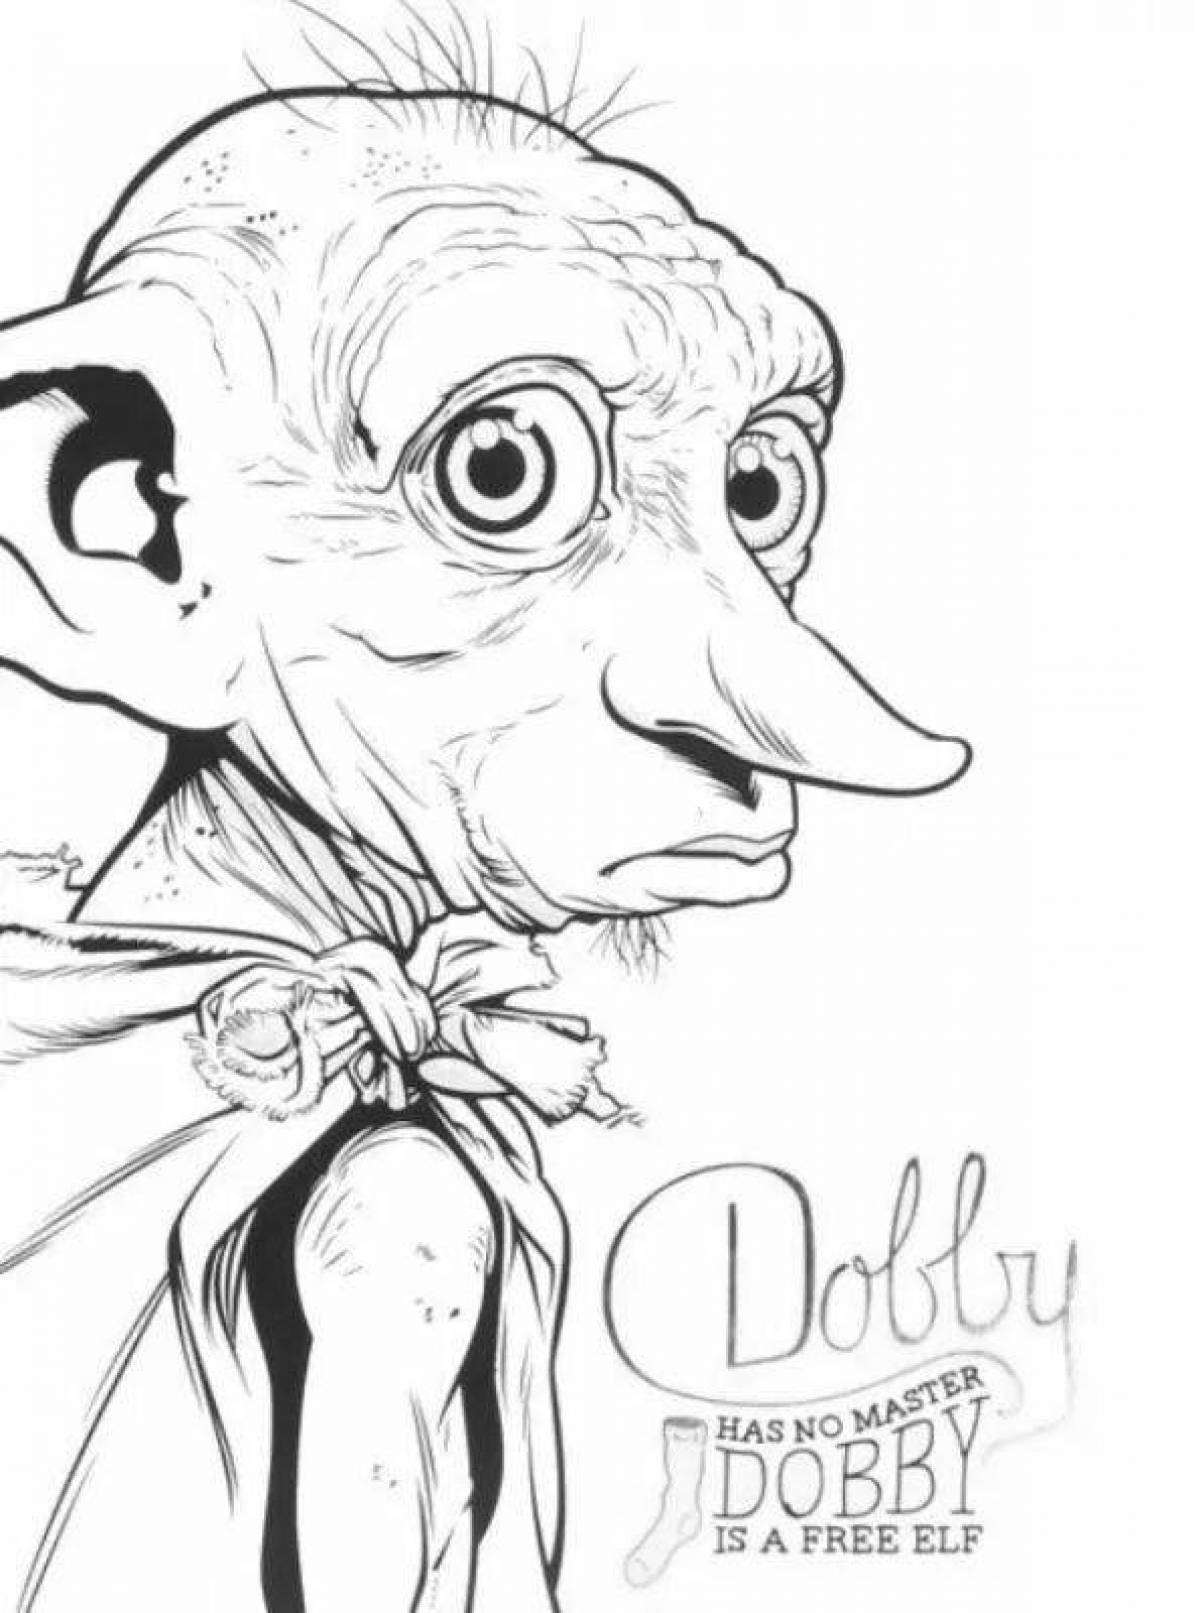 Dobby's adorable coloring page